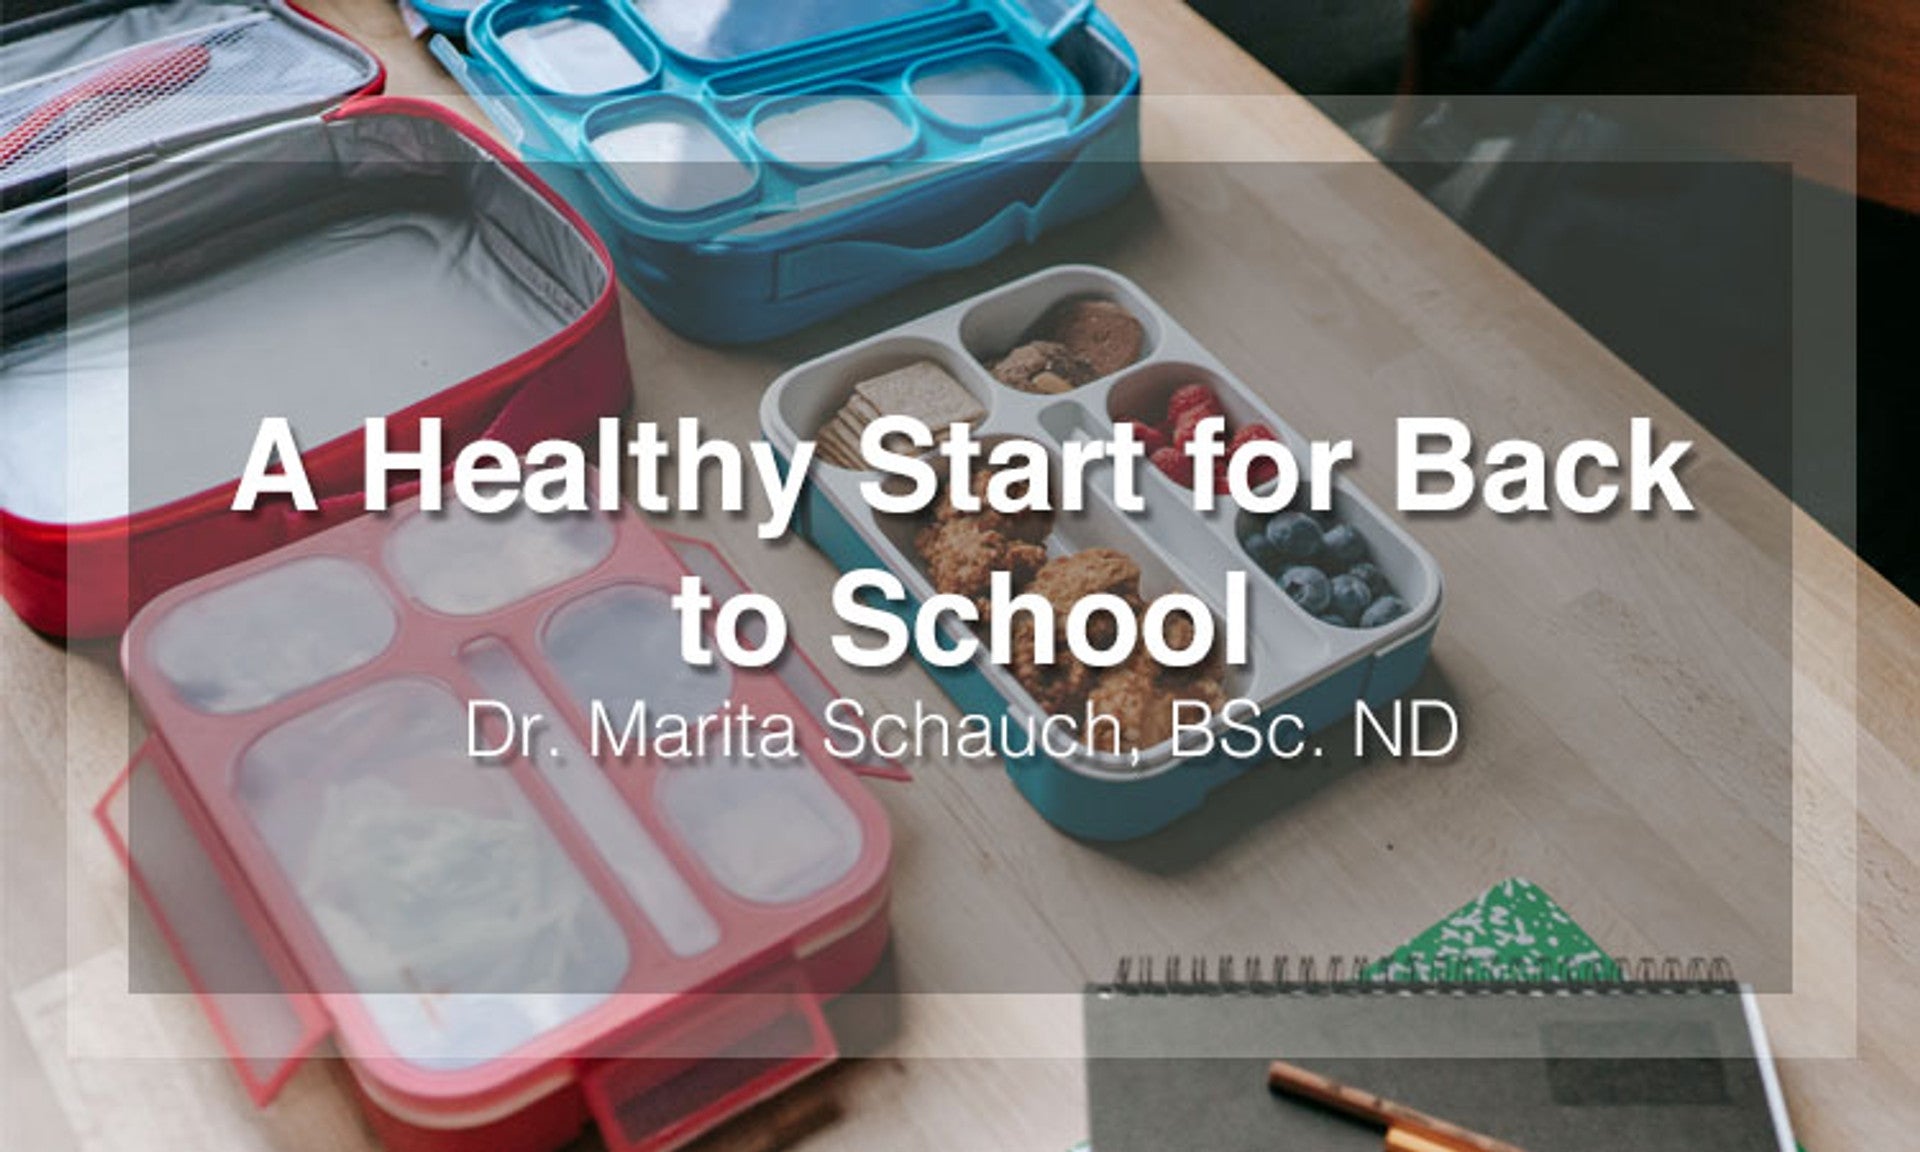 A Healthy Start for Back to School